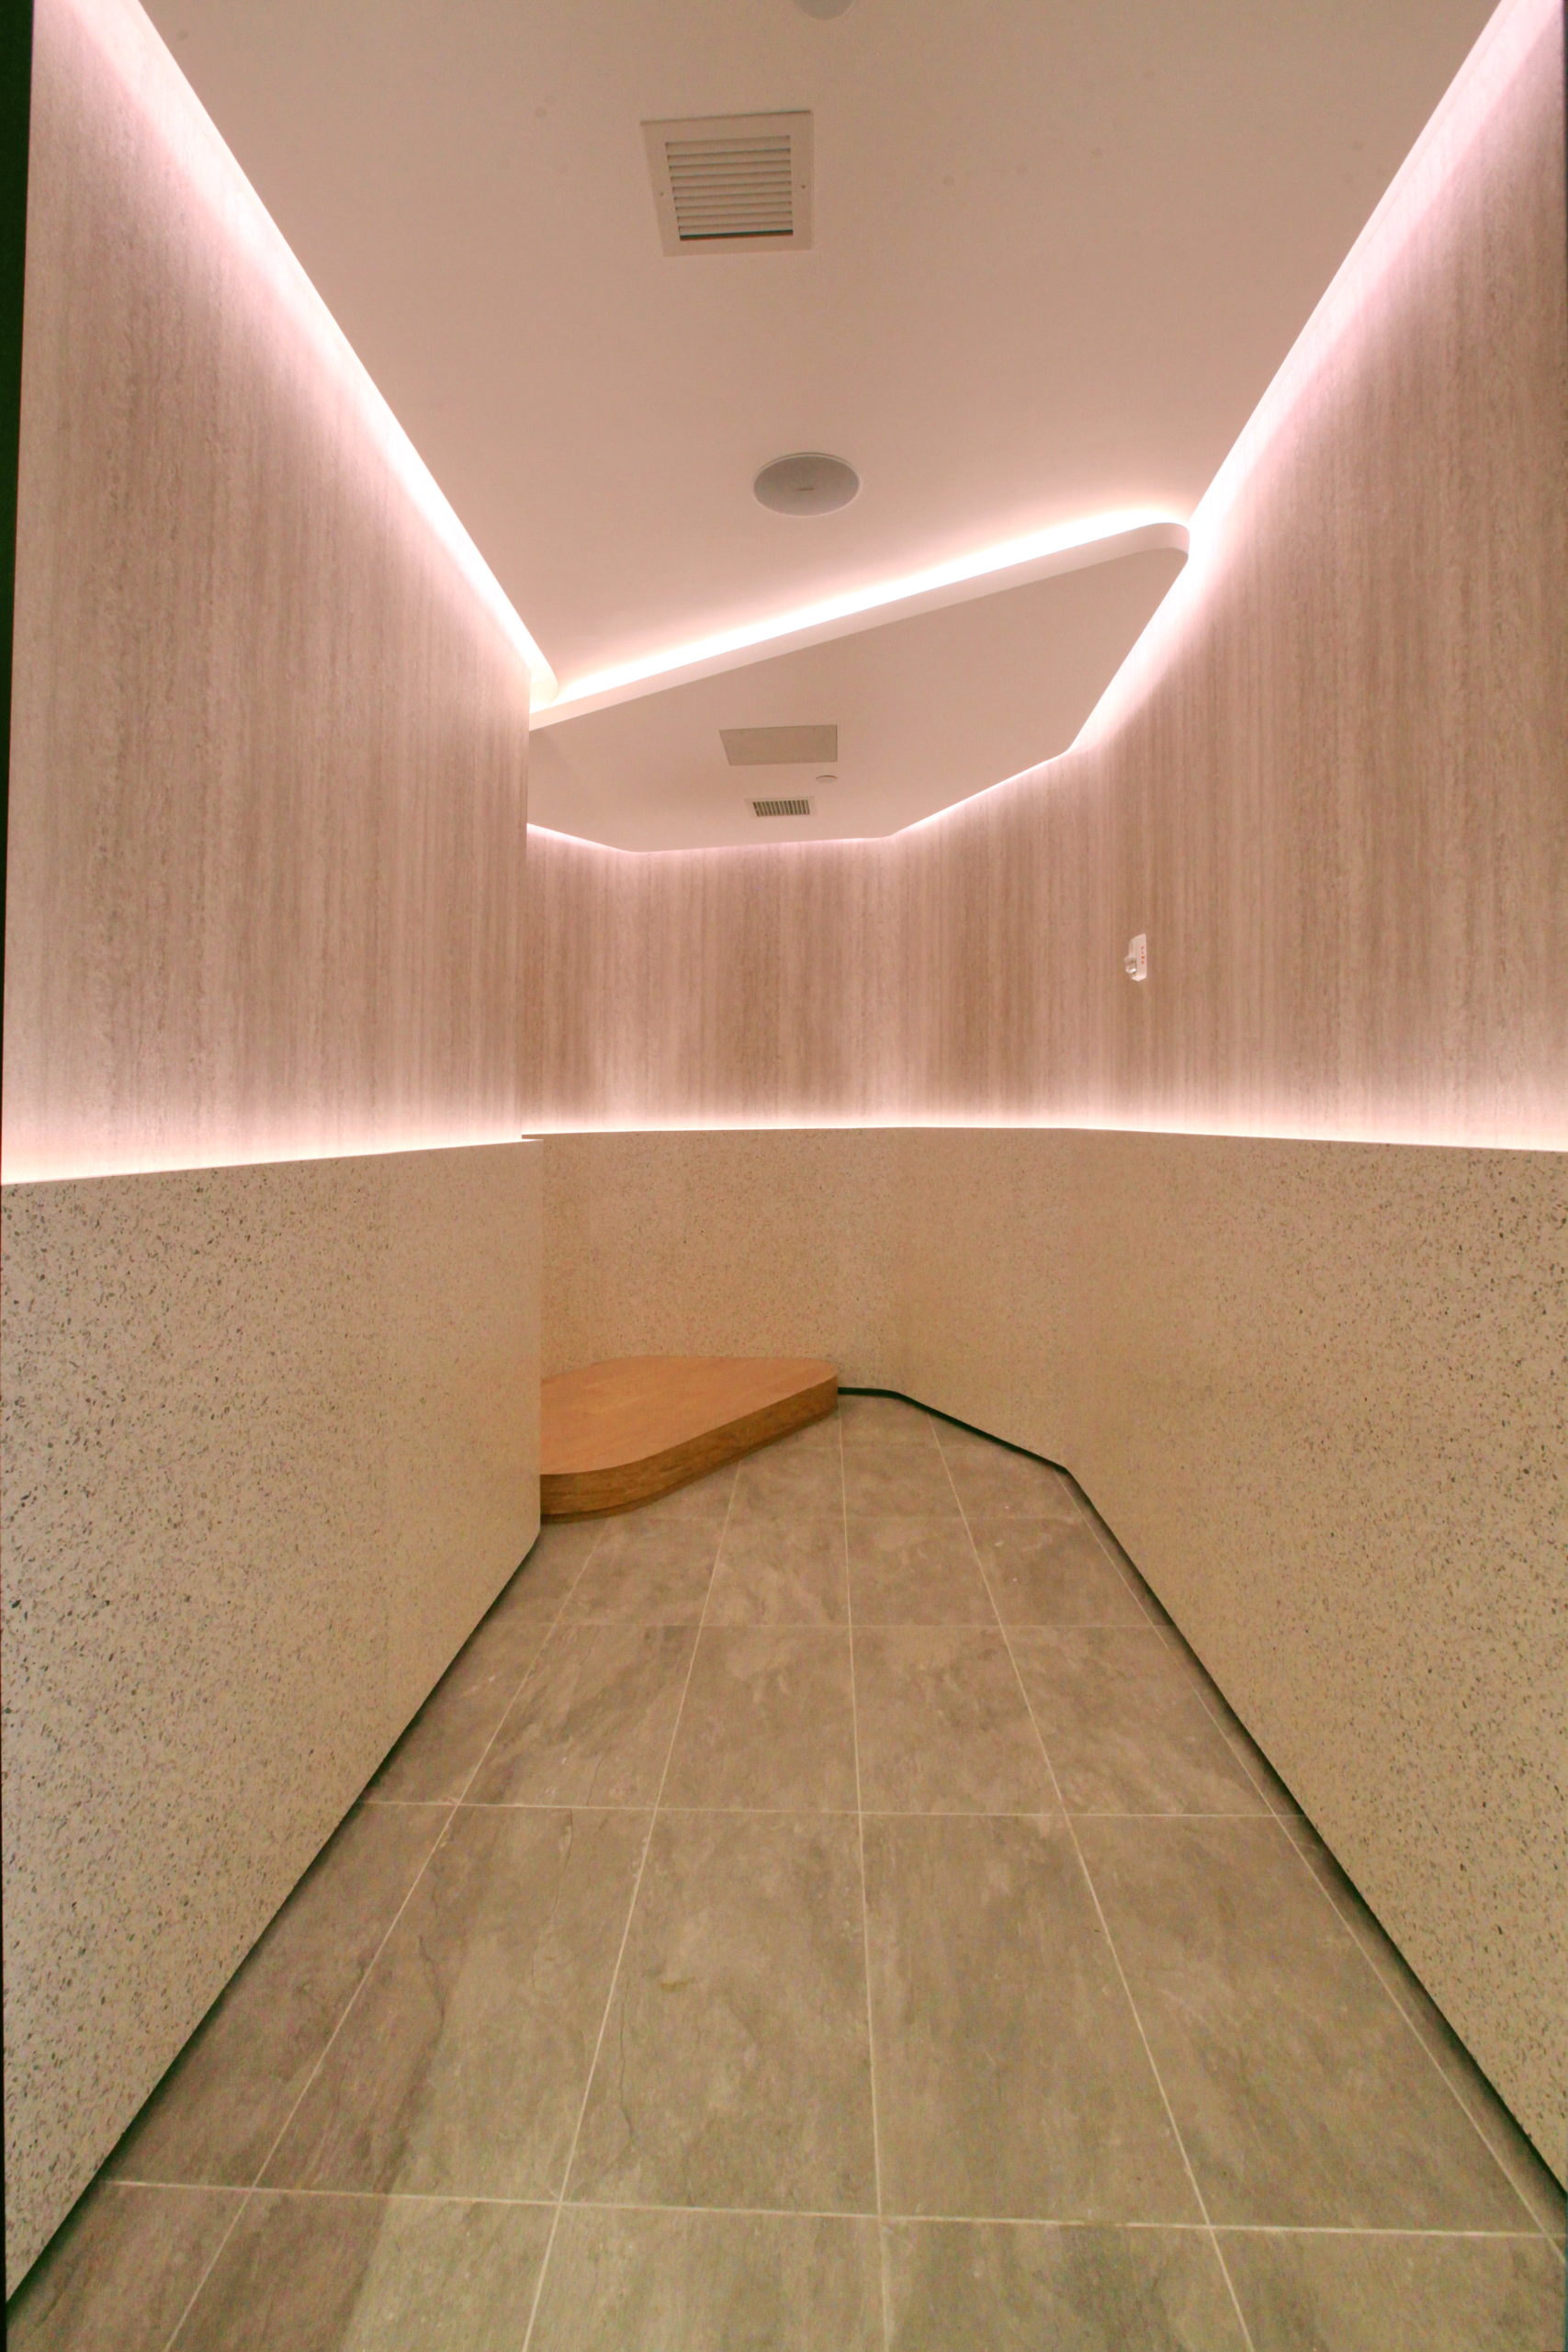 A Salt Room With Led Lighting Around The Walls At Renaissance New York Flushing Hotel At Tangram In Flushing, New York.